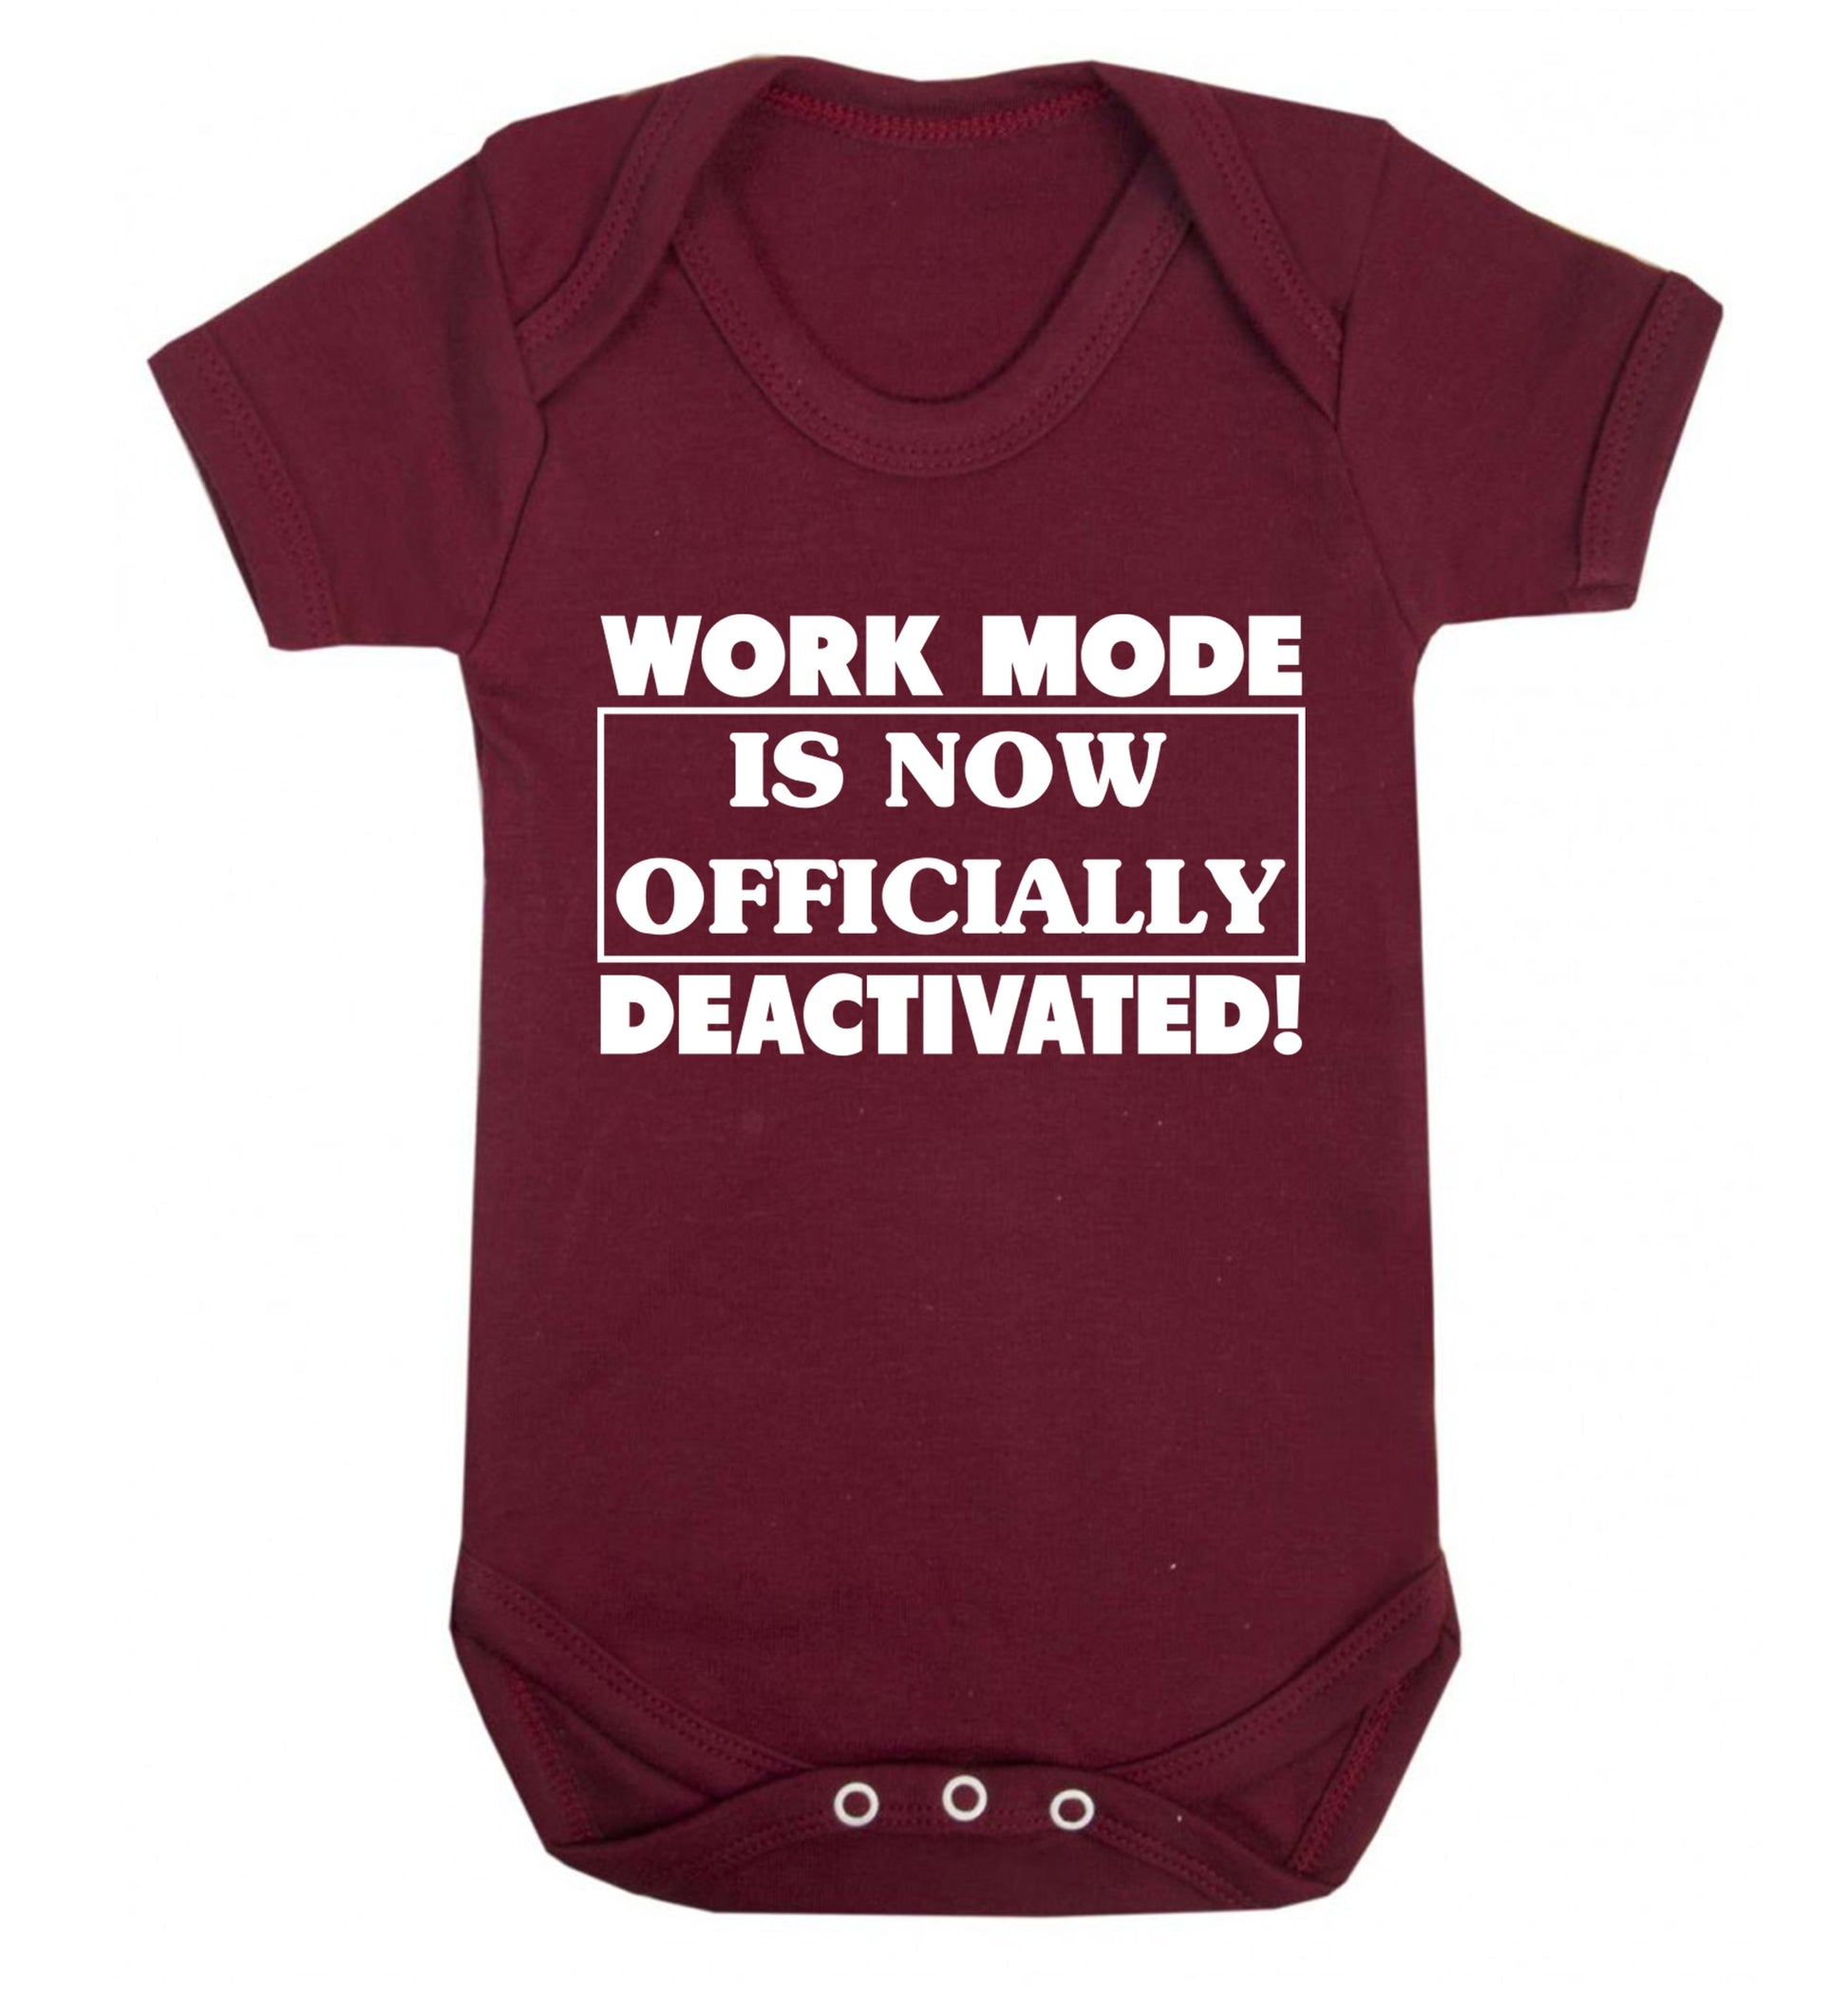 Work mode is now officially deactivated Baby Vest maroon 18-24 months